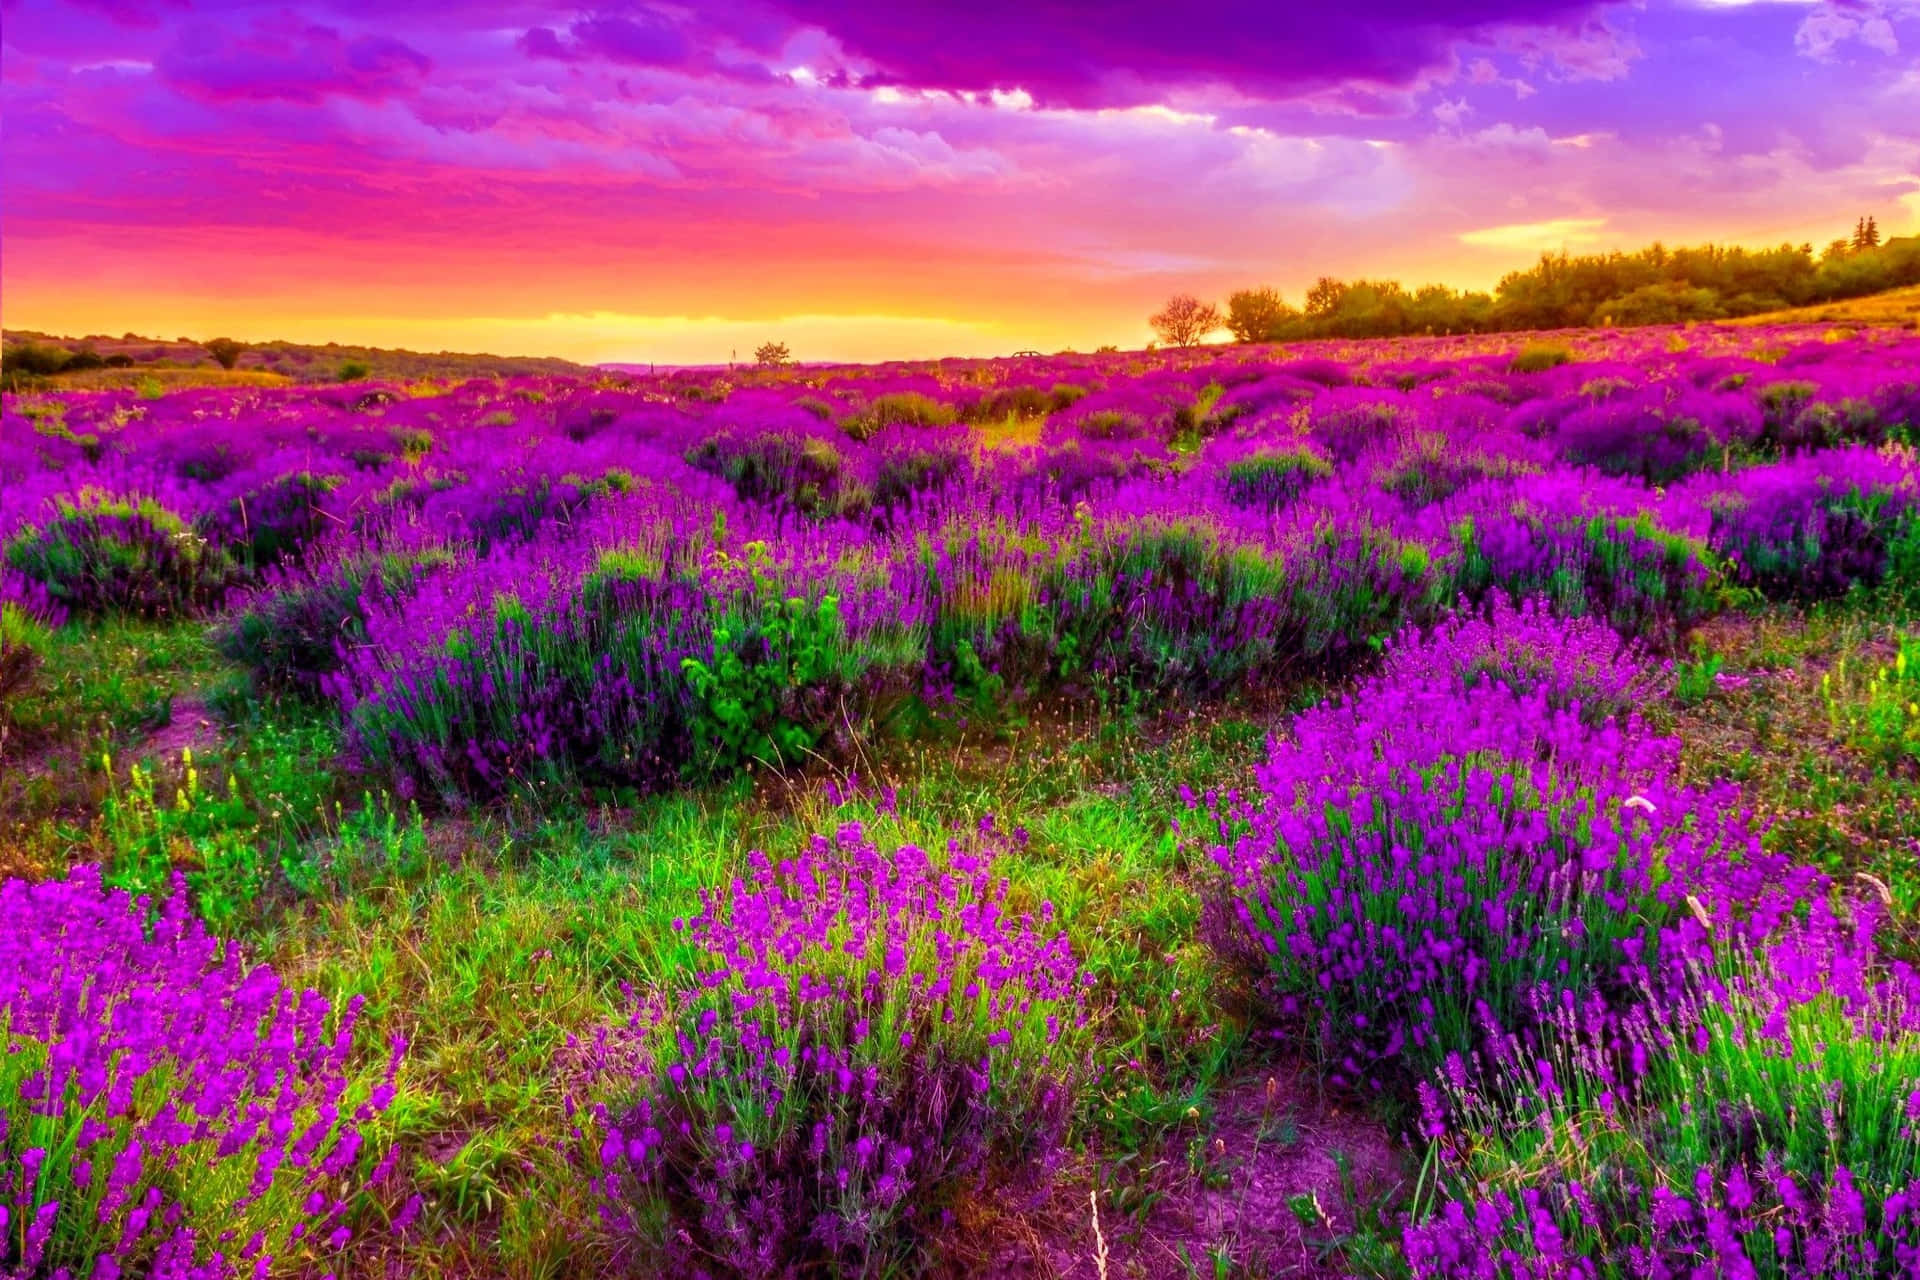 Enjoy the beauty of nature with this stunning screensaver